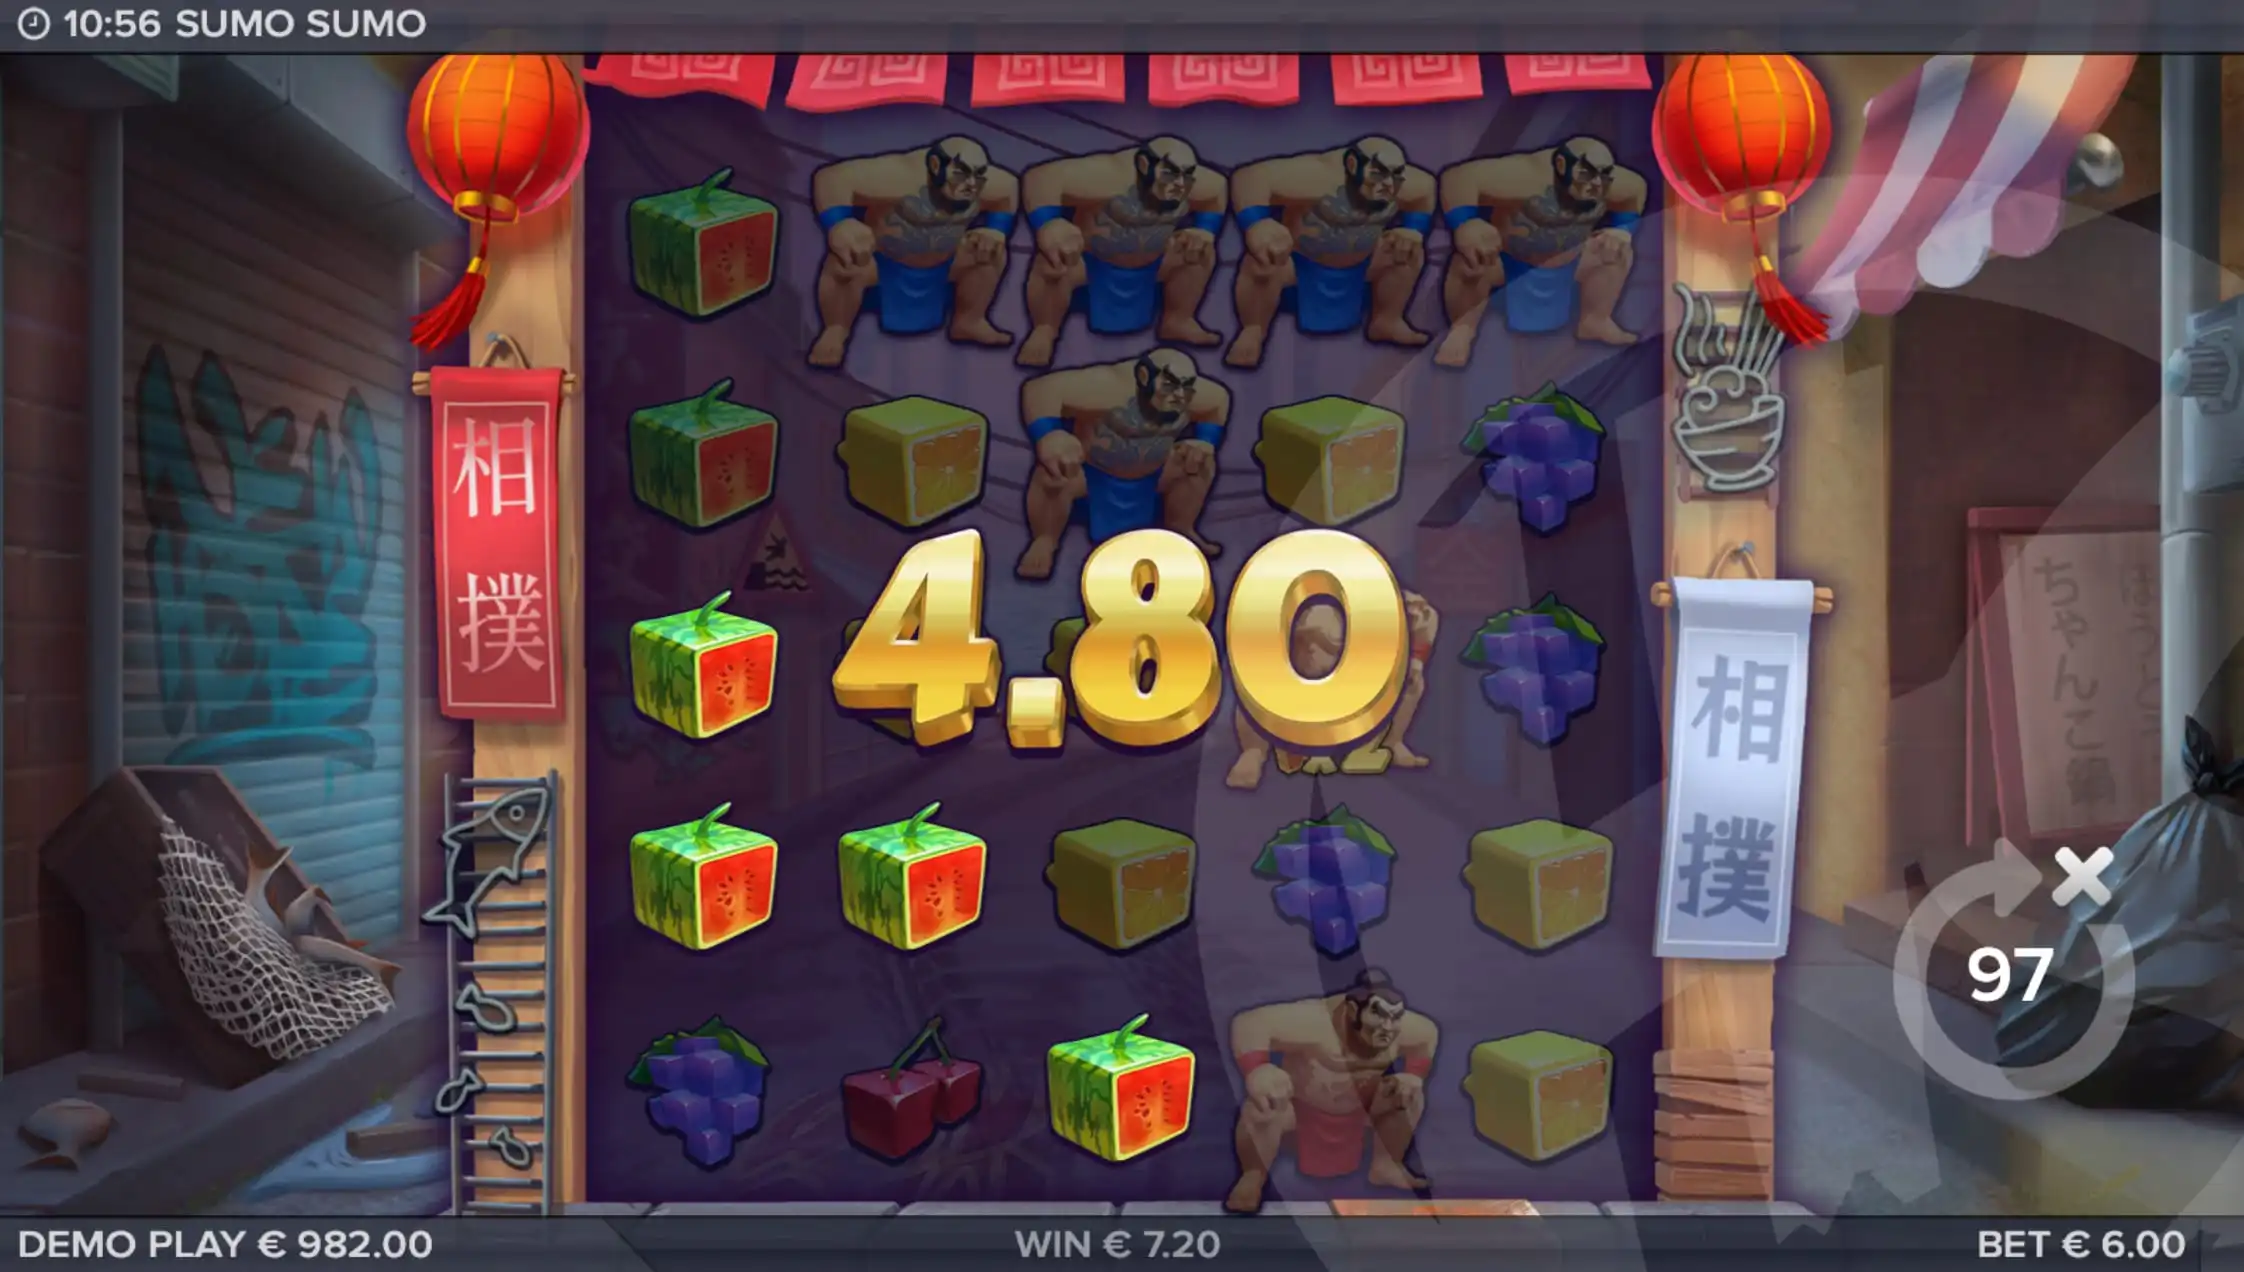 Sumo Sumo Offers Players 259 Ways to Win